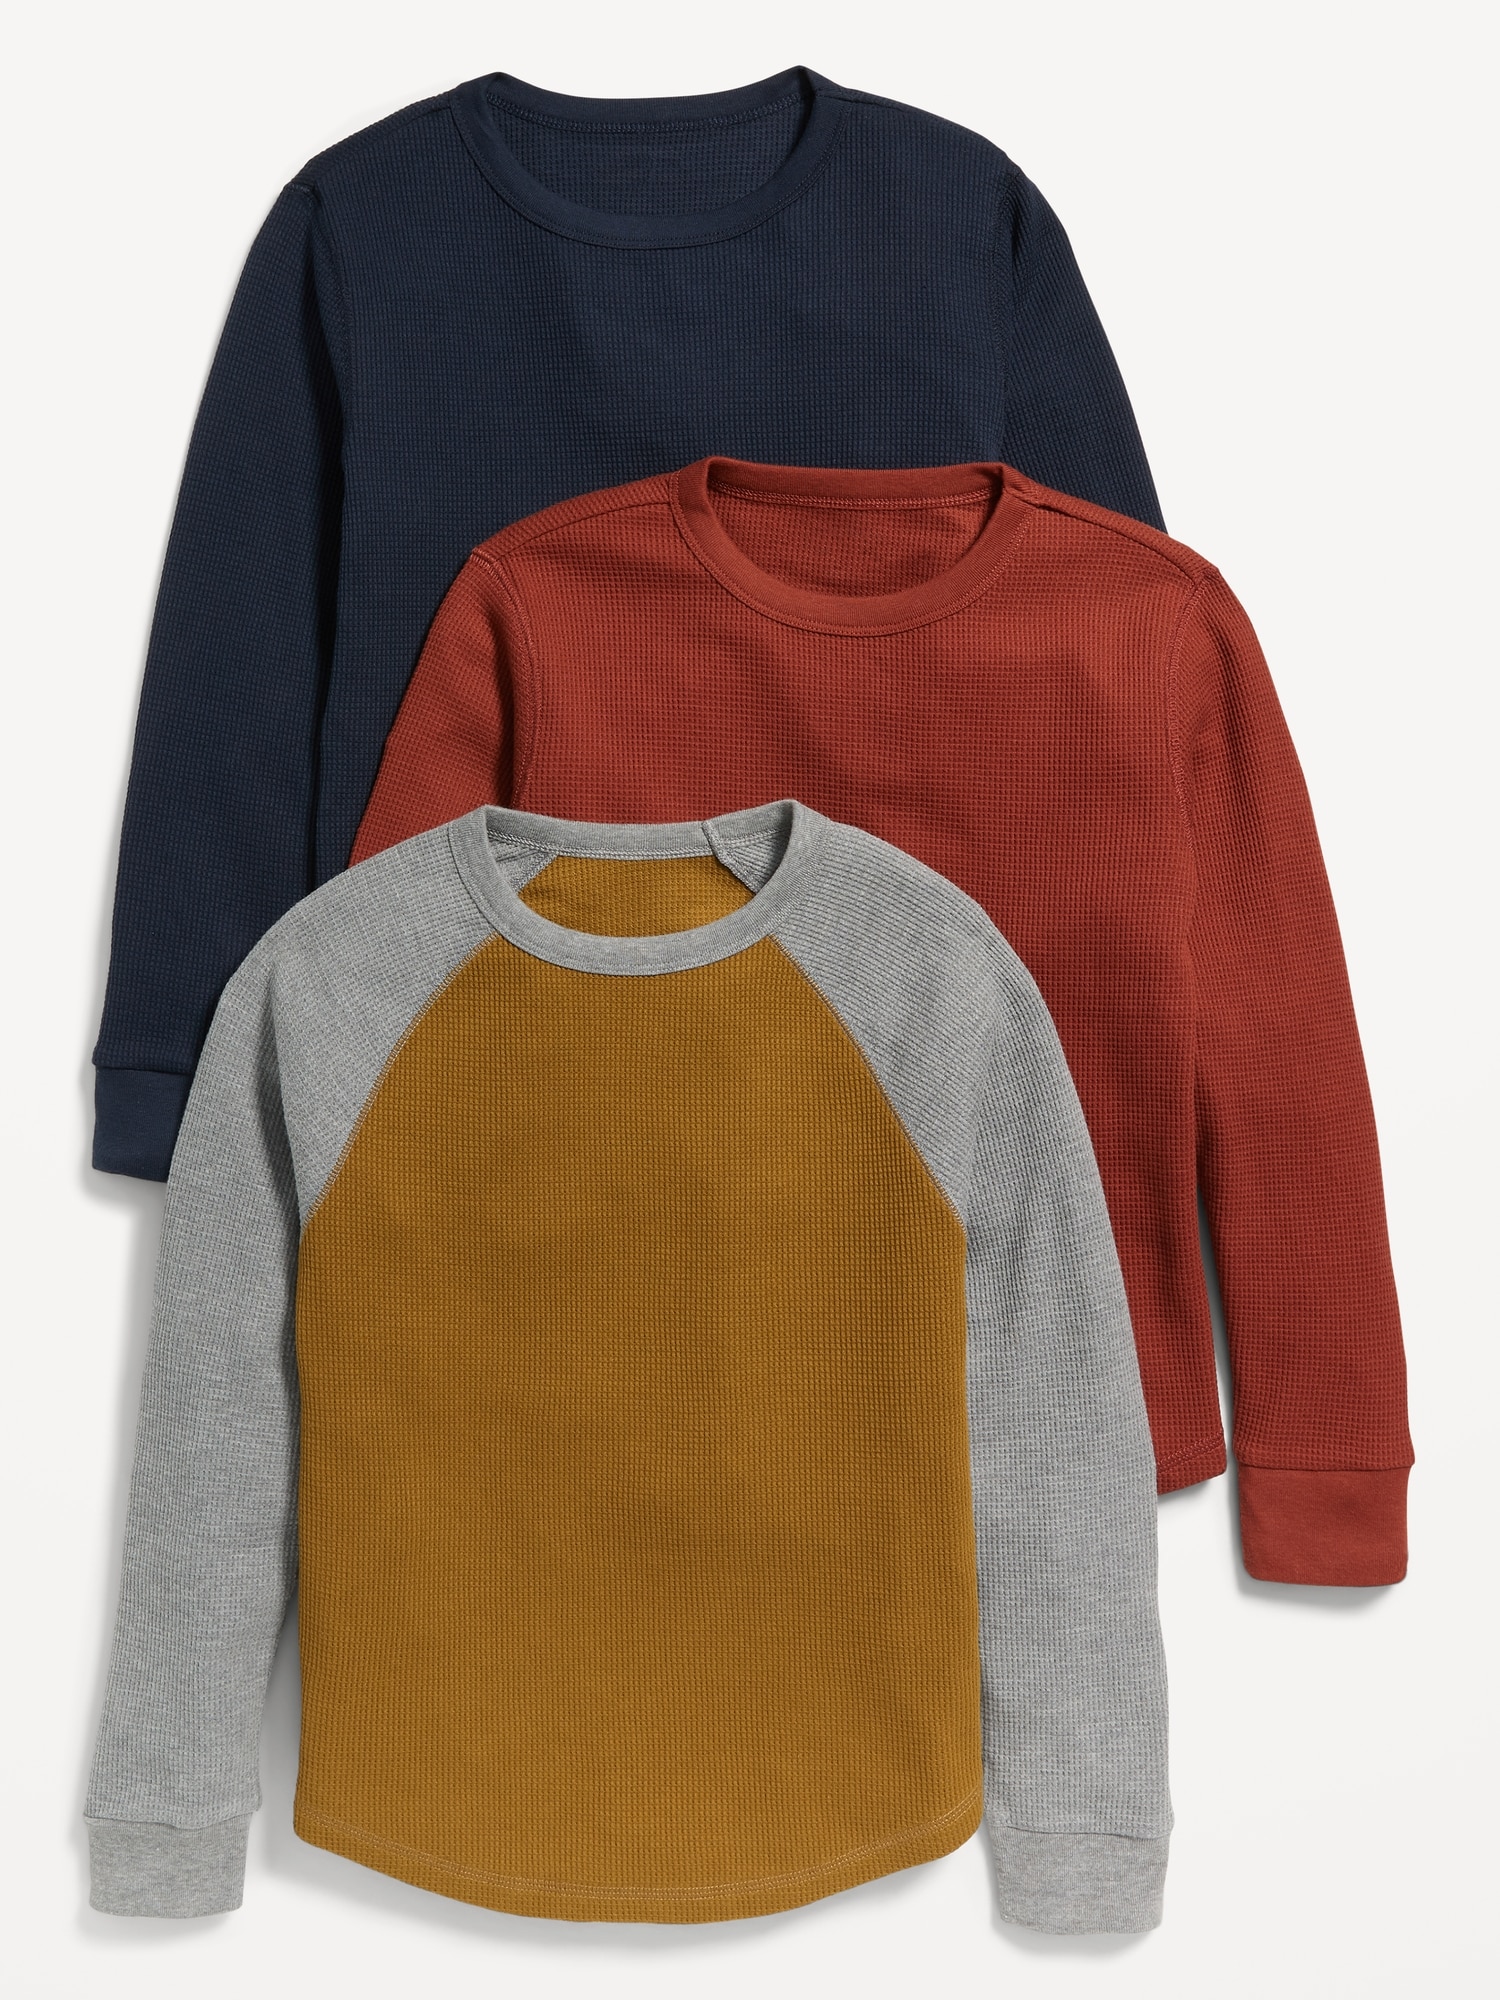 Thermal-Knit Long-Sleeve T-Shirt Variety 3-Pack for Boys